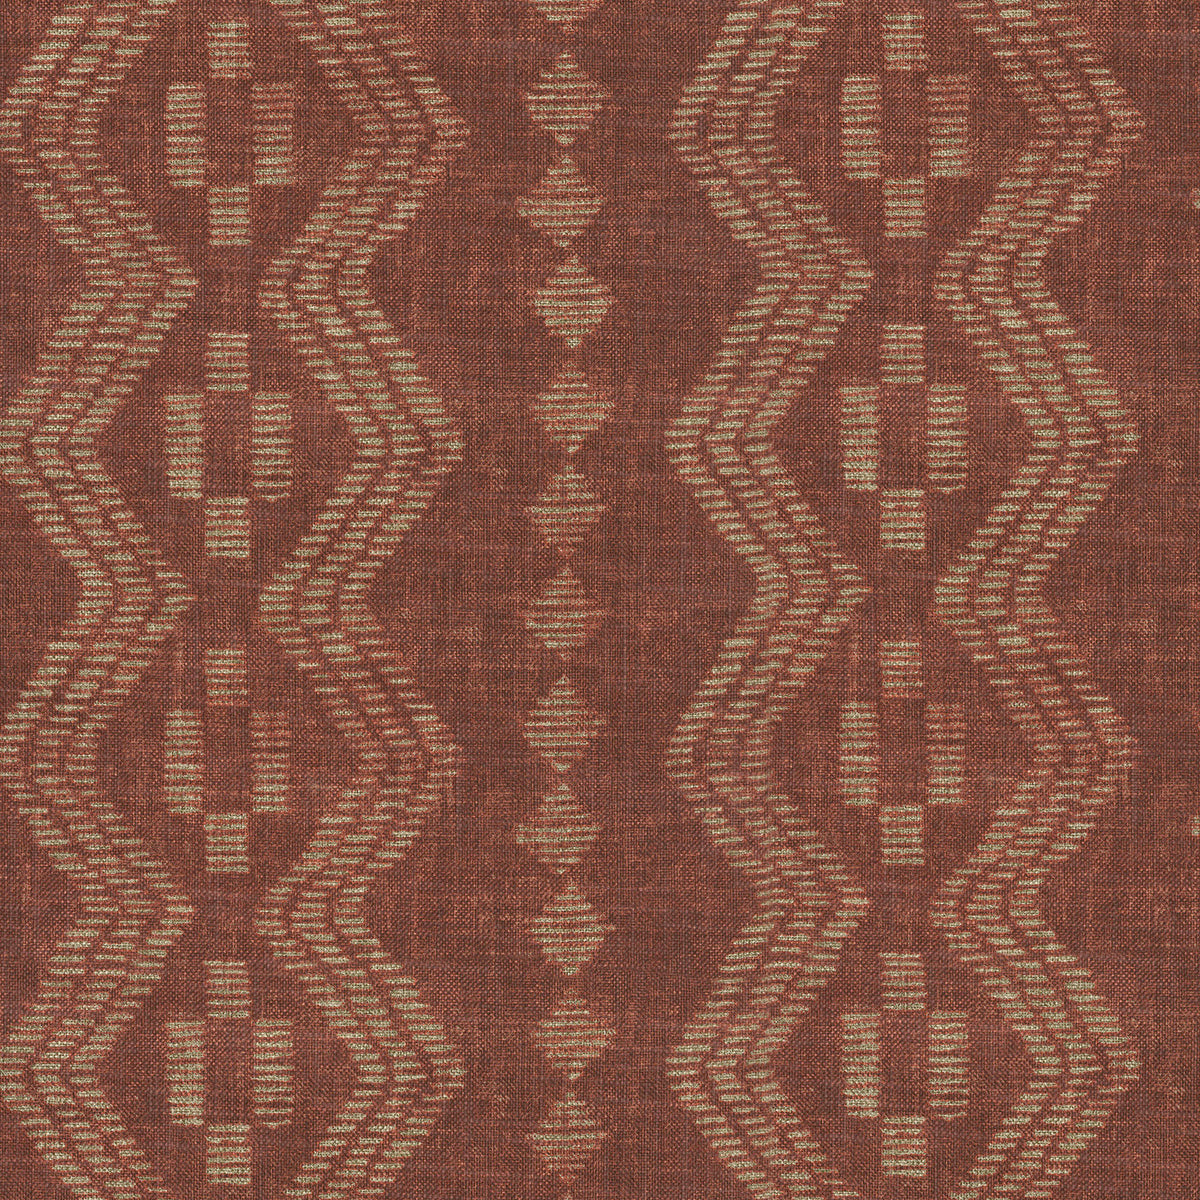 P/K Lifestyles River Bend - Barn 411912 Upholstery Fabric